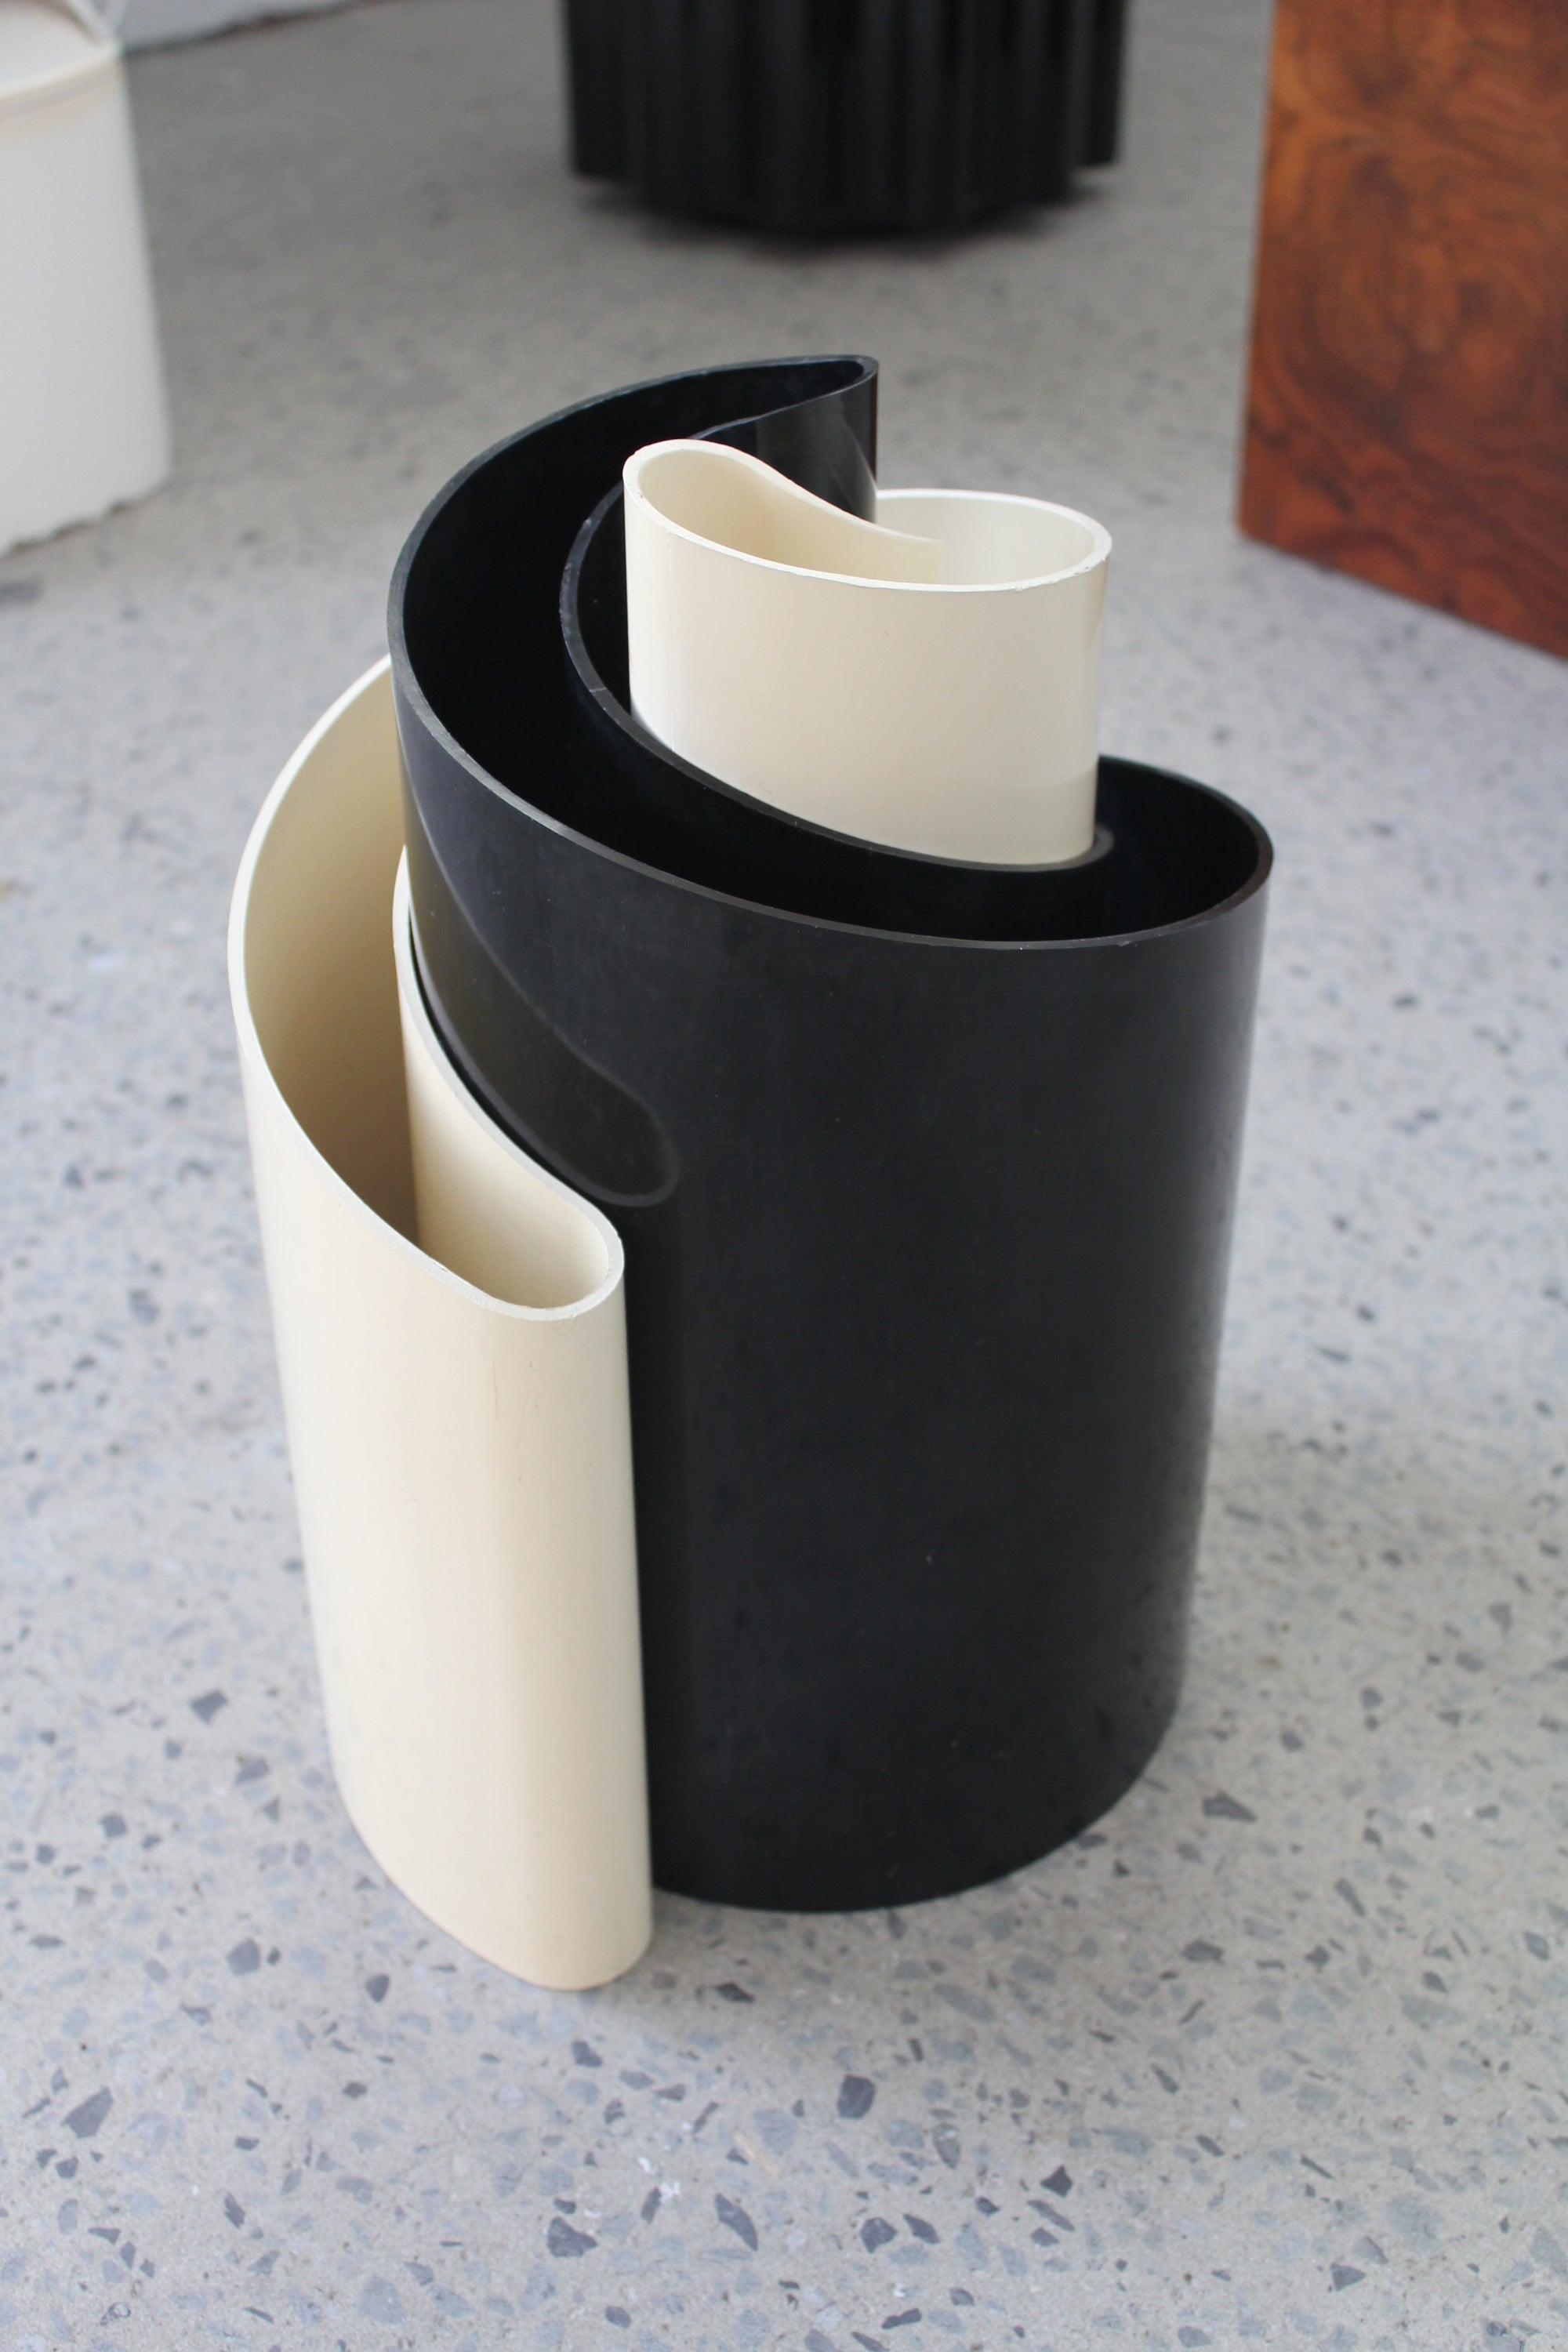 Deda Vase by Giotto Stoppino for Heller